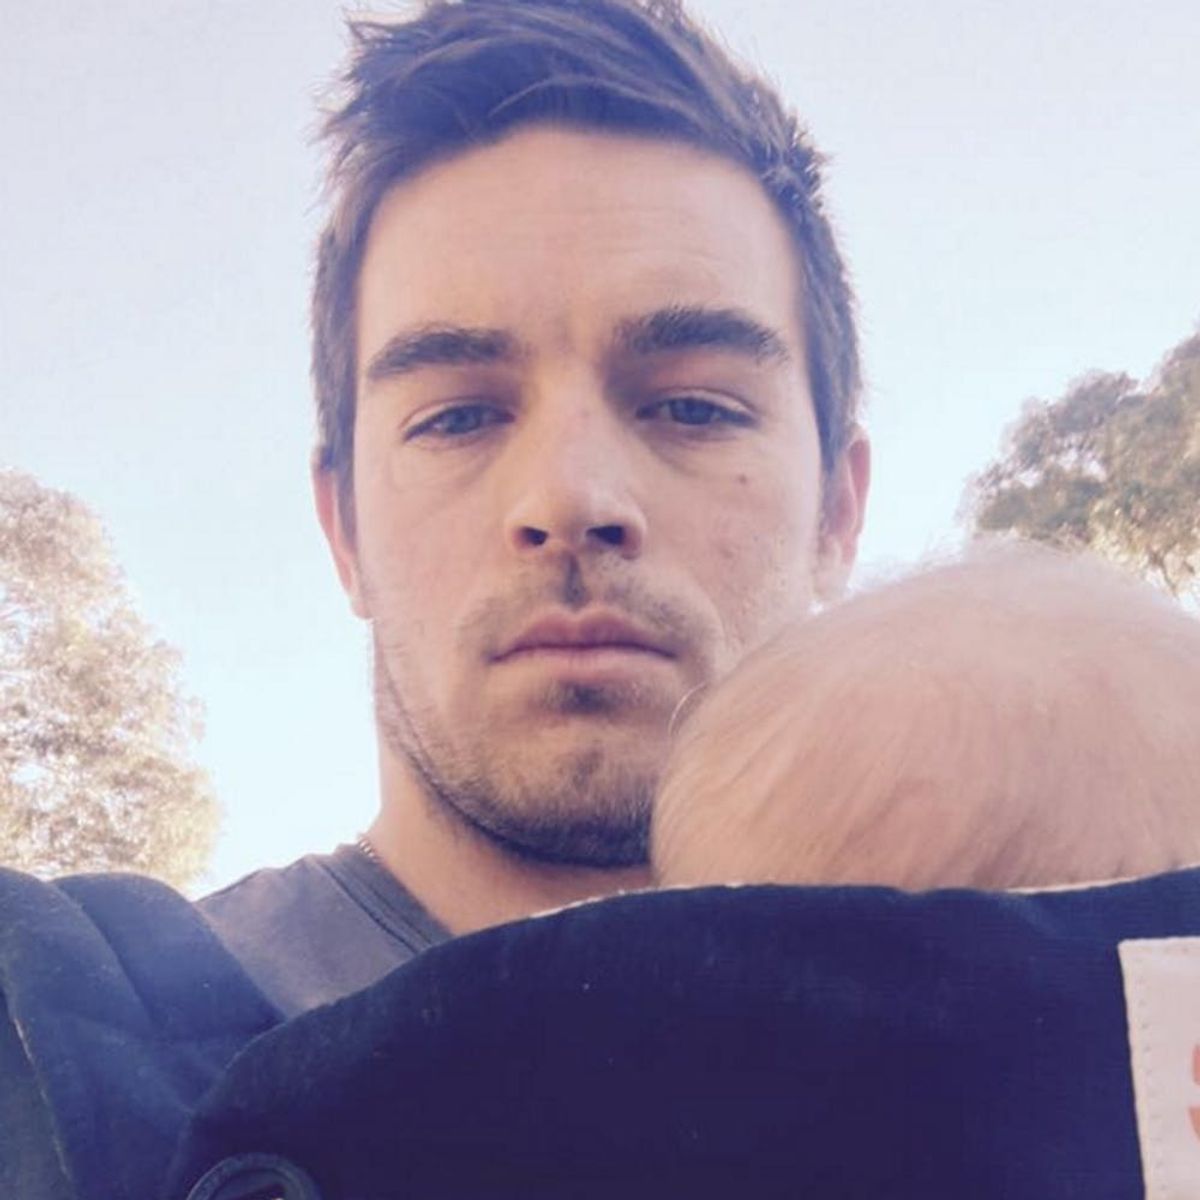 This Stay-at-Home Dad’s Post on Parenting Has Been Shared 17,000 Times